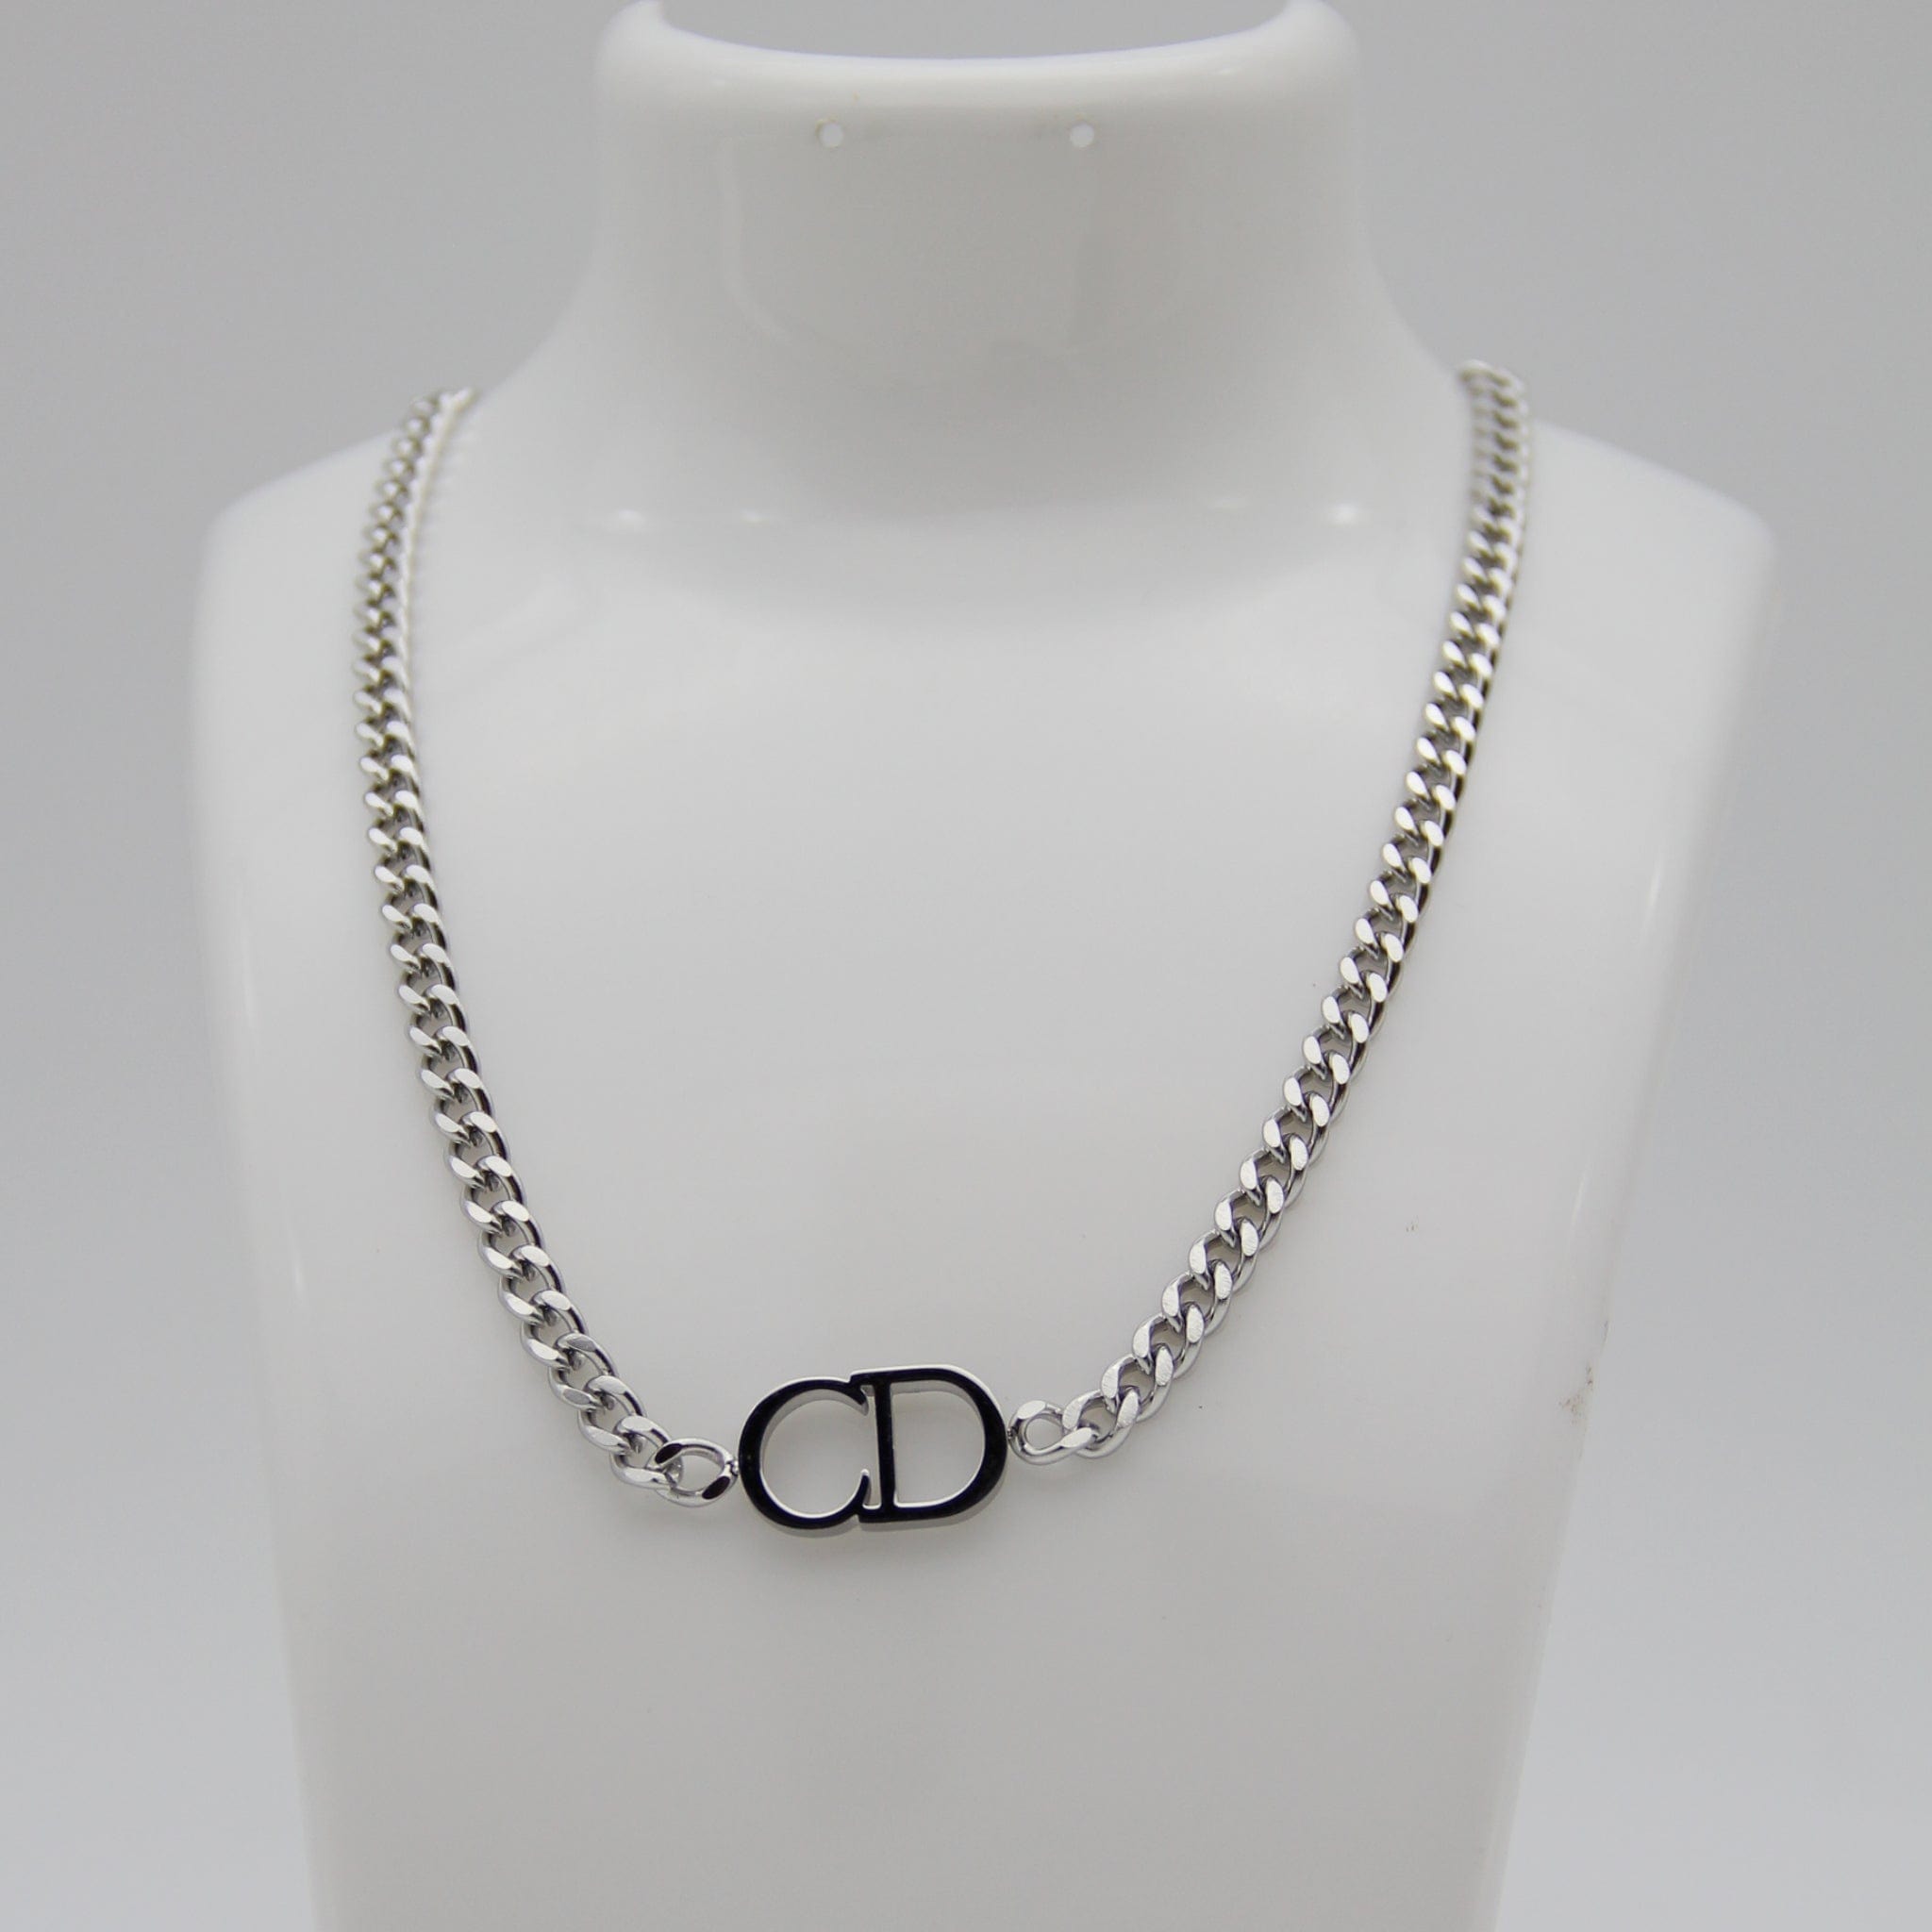 Outlet W&B Female Necklaces CD Silvered Stainless Steel Necklace